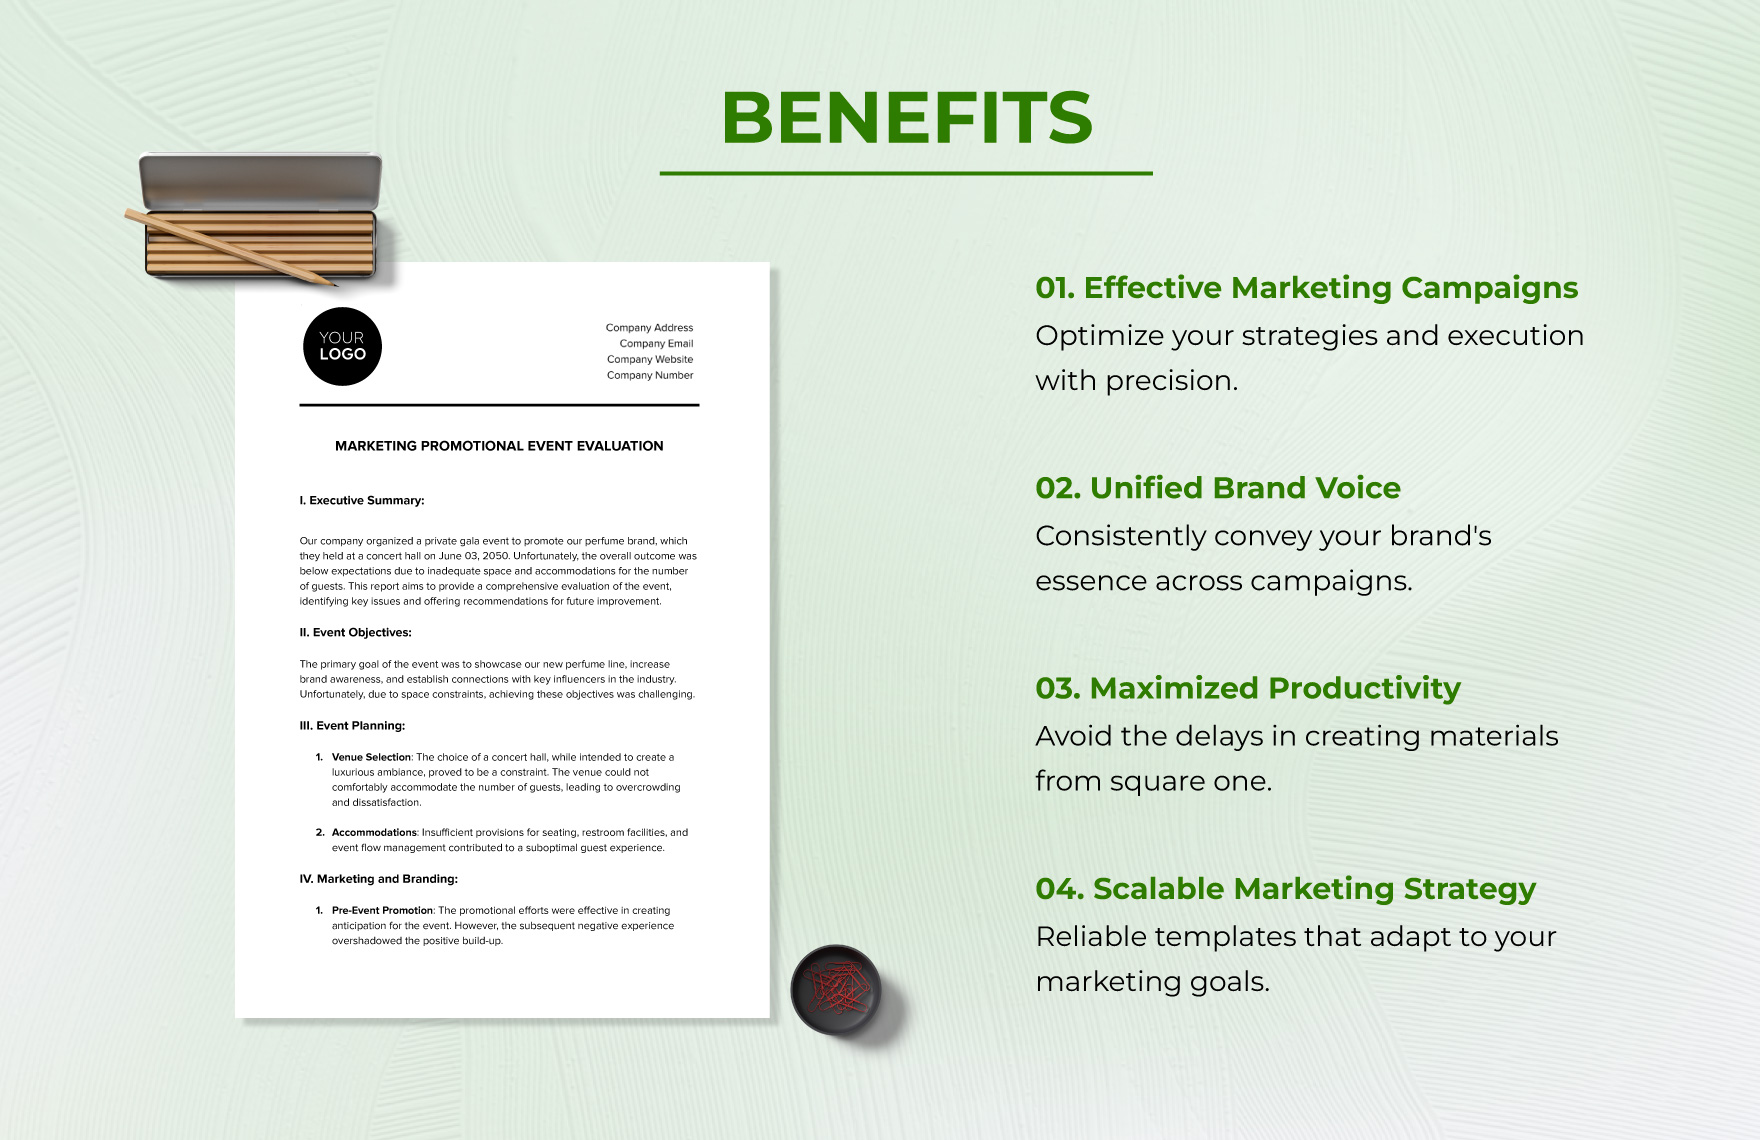 Marketing Promotional Event Evaluation Template